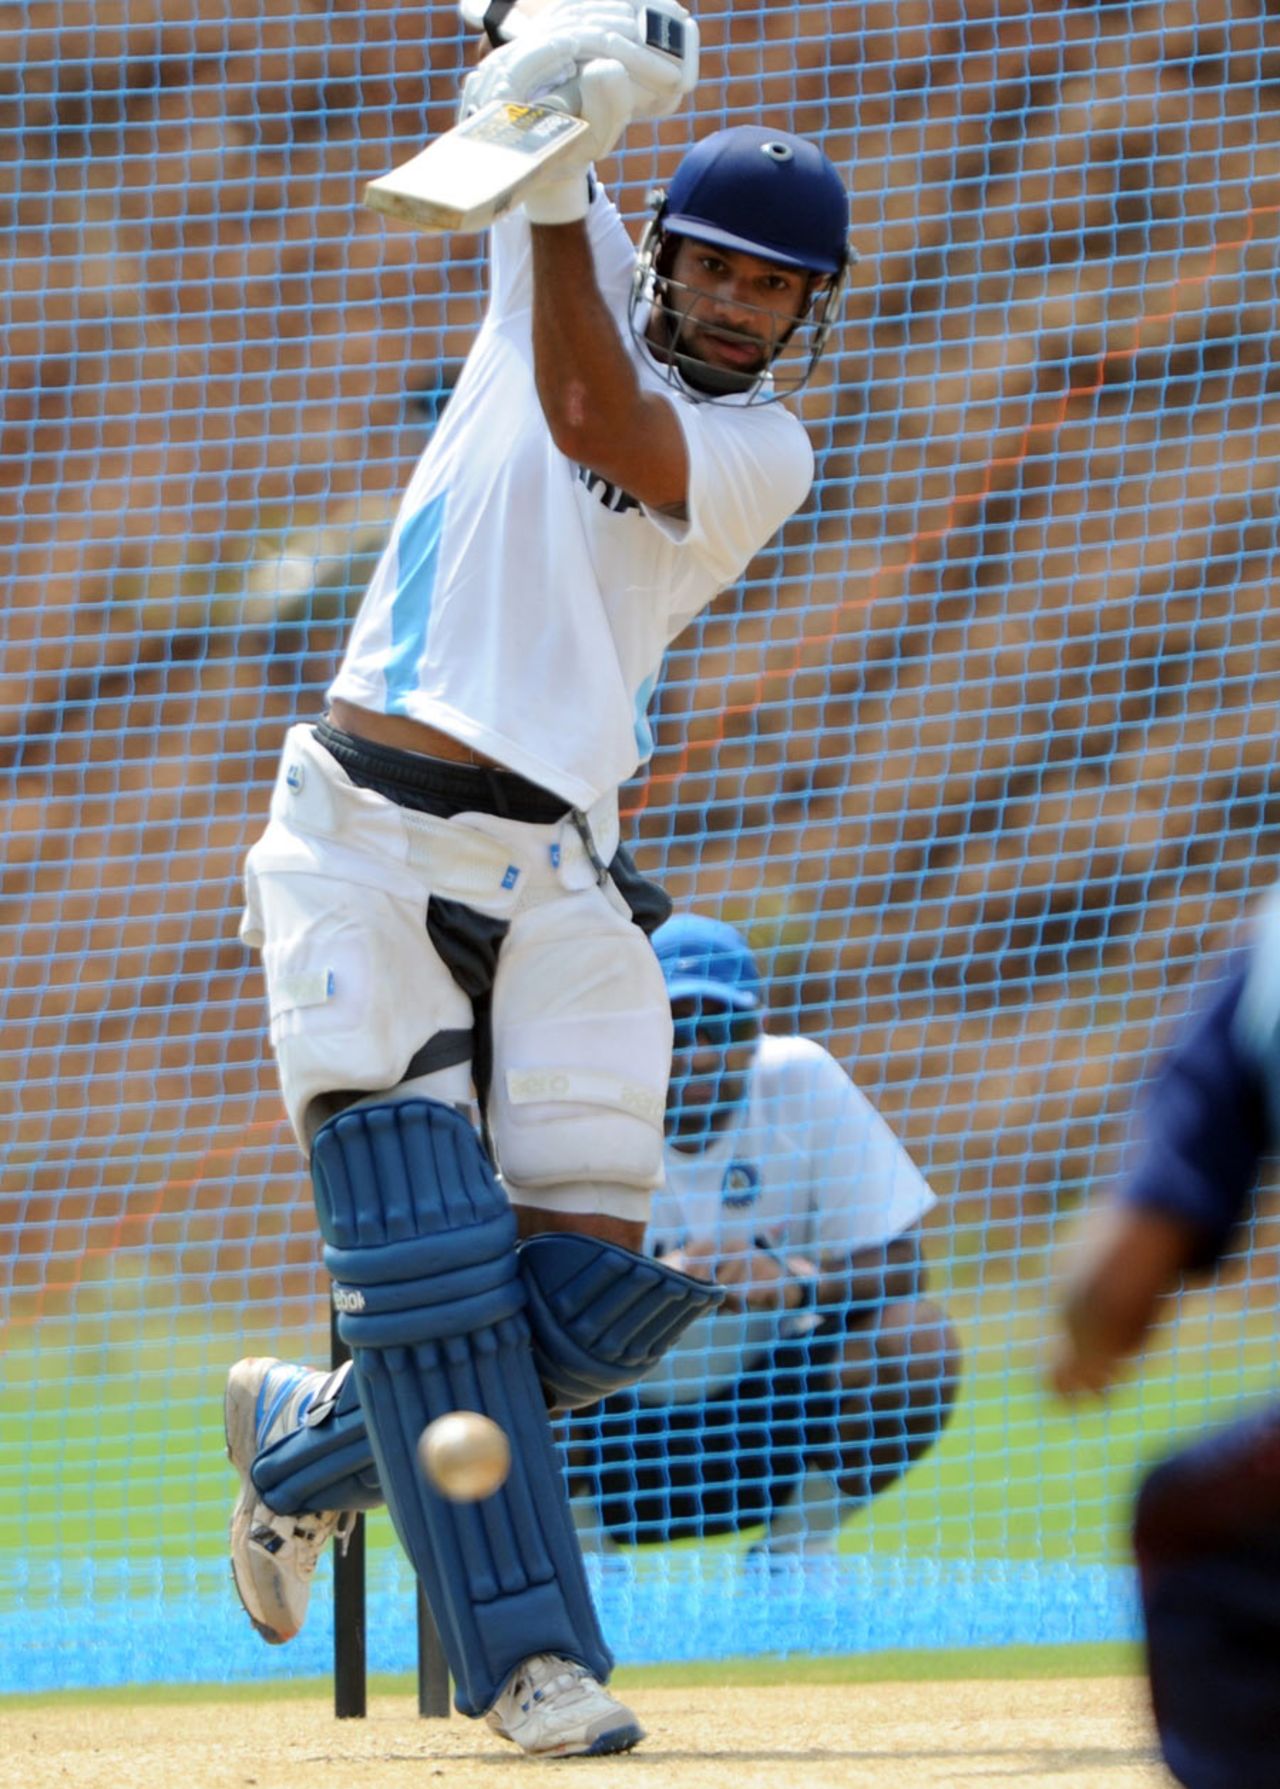 Shikhar Dhawan punches the ball down the ground during training, Visakhapatnam, October 19, 2010